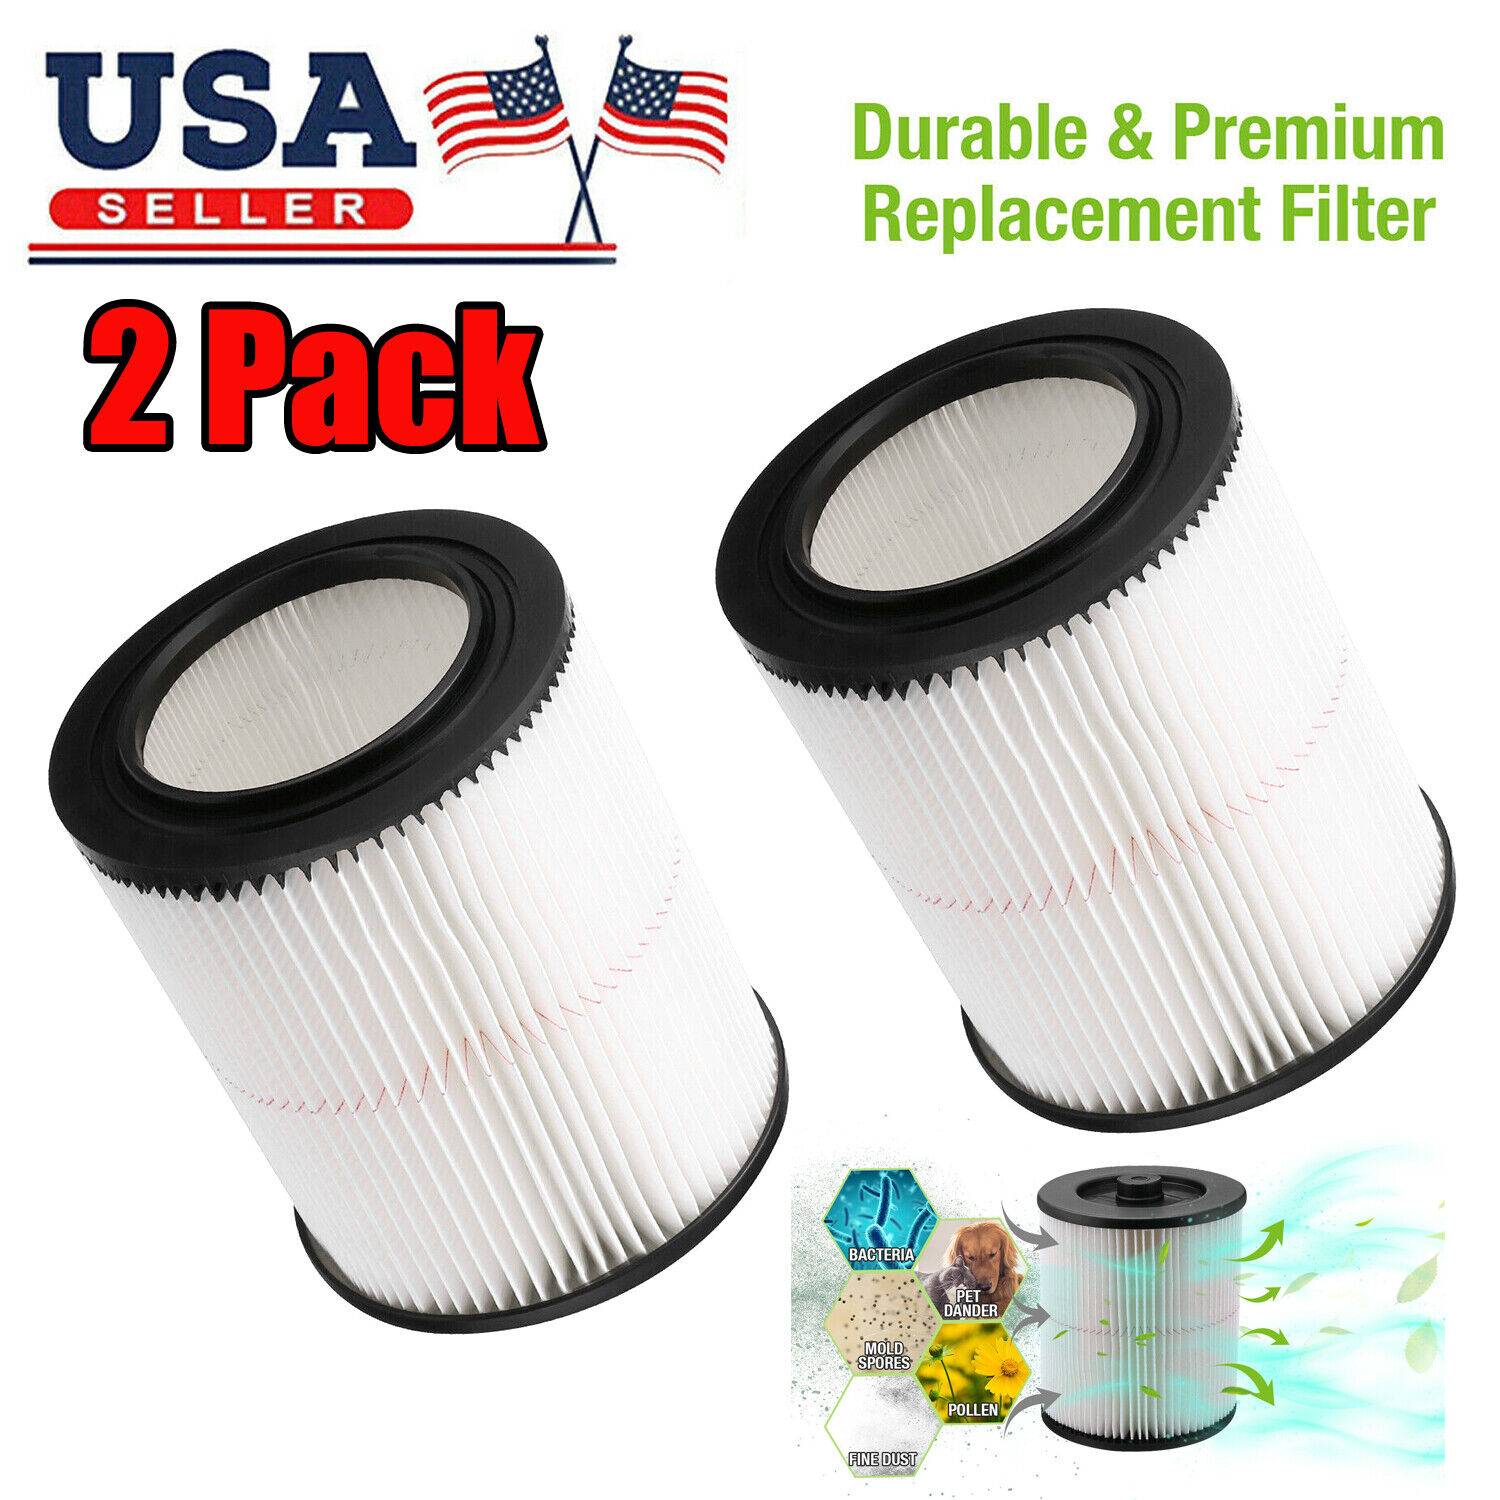 2xReplacement Cartridge Filter for Shop Vac Craftsman 9-17816 Wet Dry Air Filter Housmile